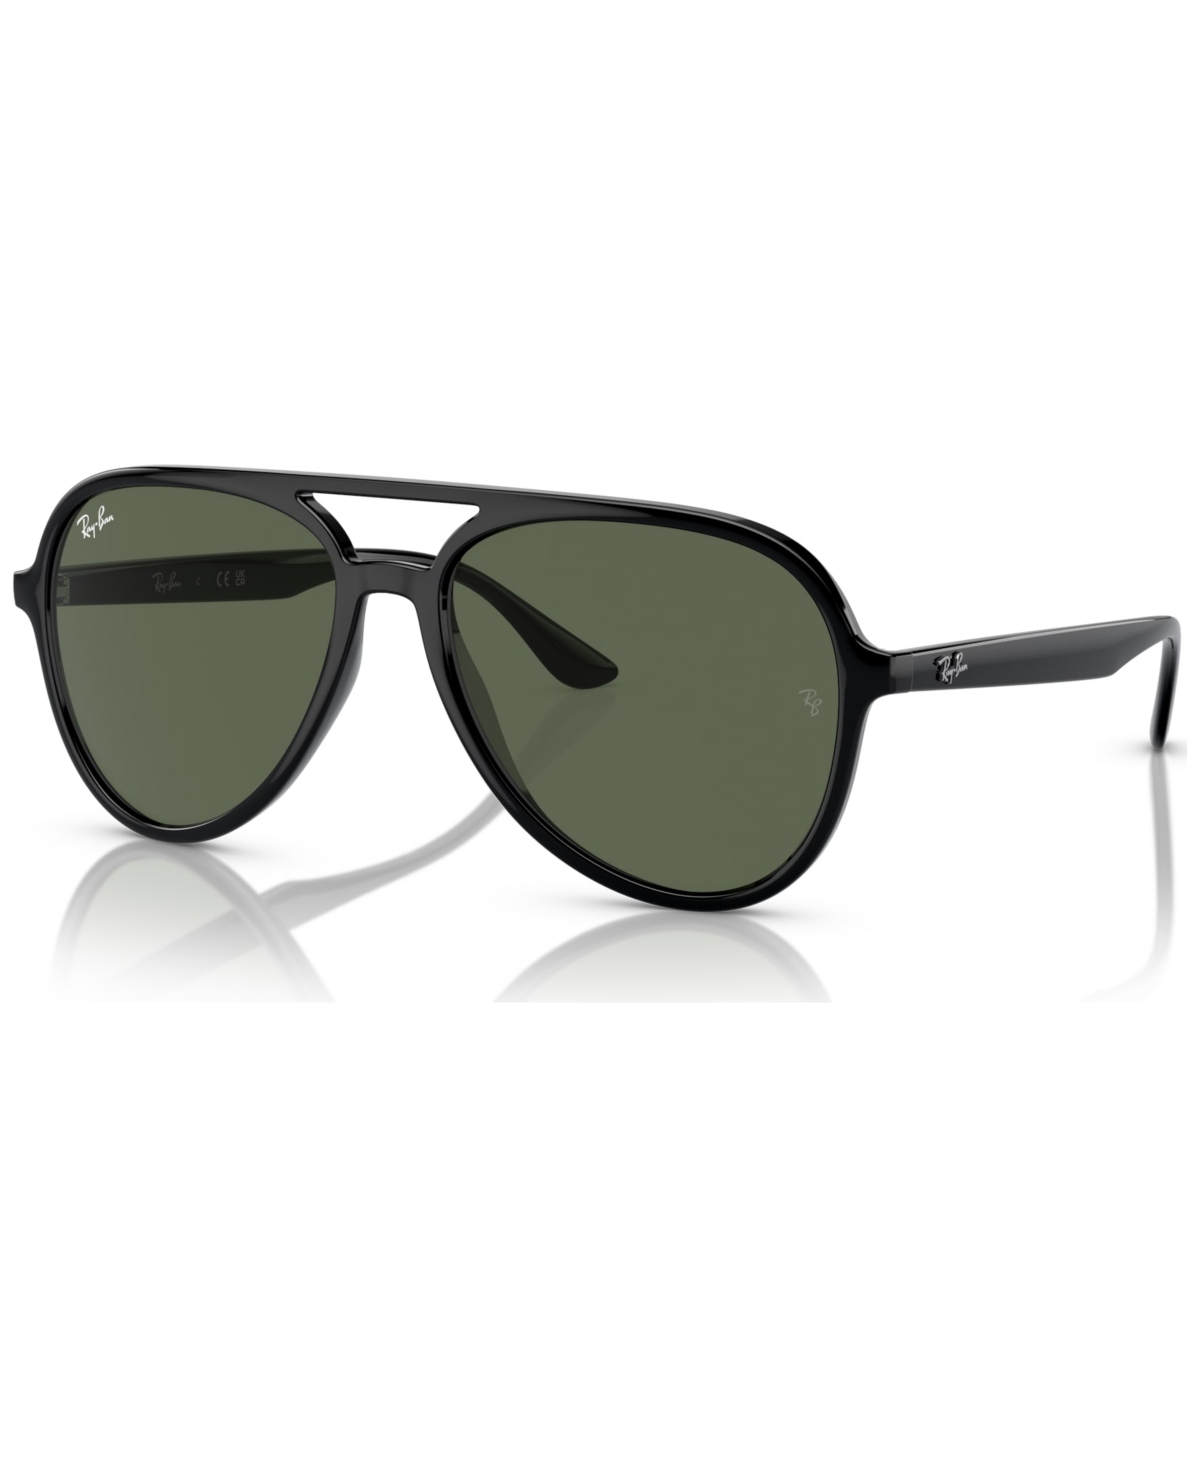 Ray Ban Unisex Sunglasses, Rb4376 In Black